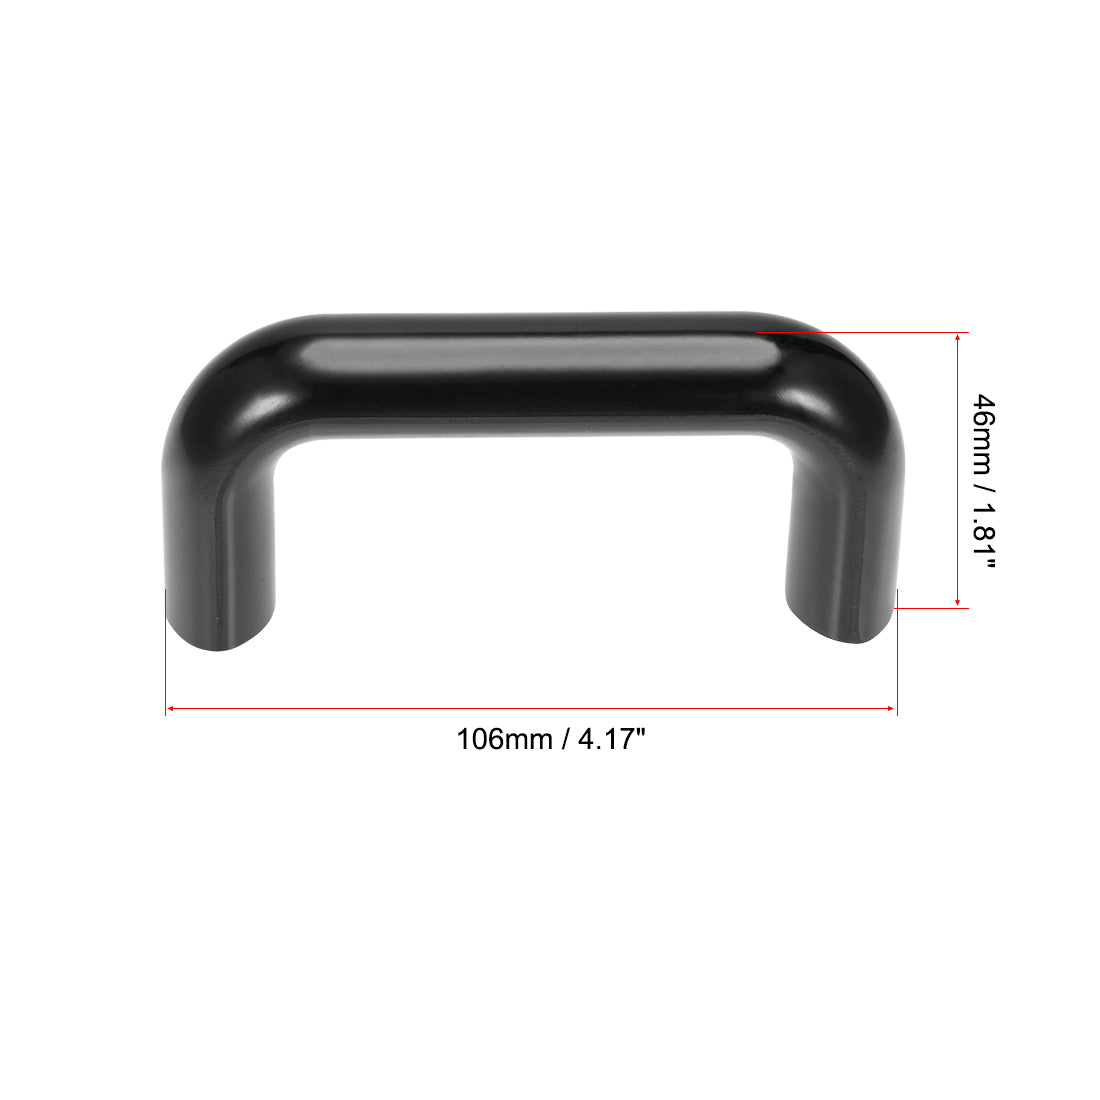 uxcell Uxcell Bakelite Pulls Handles 90mm Hole Centers Black for Industrial Machine 2Pcs